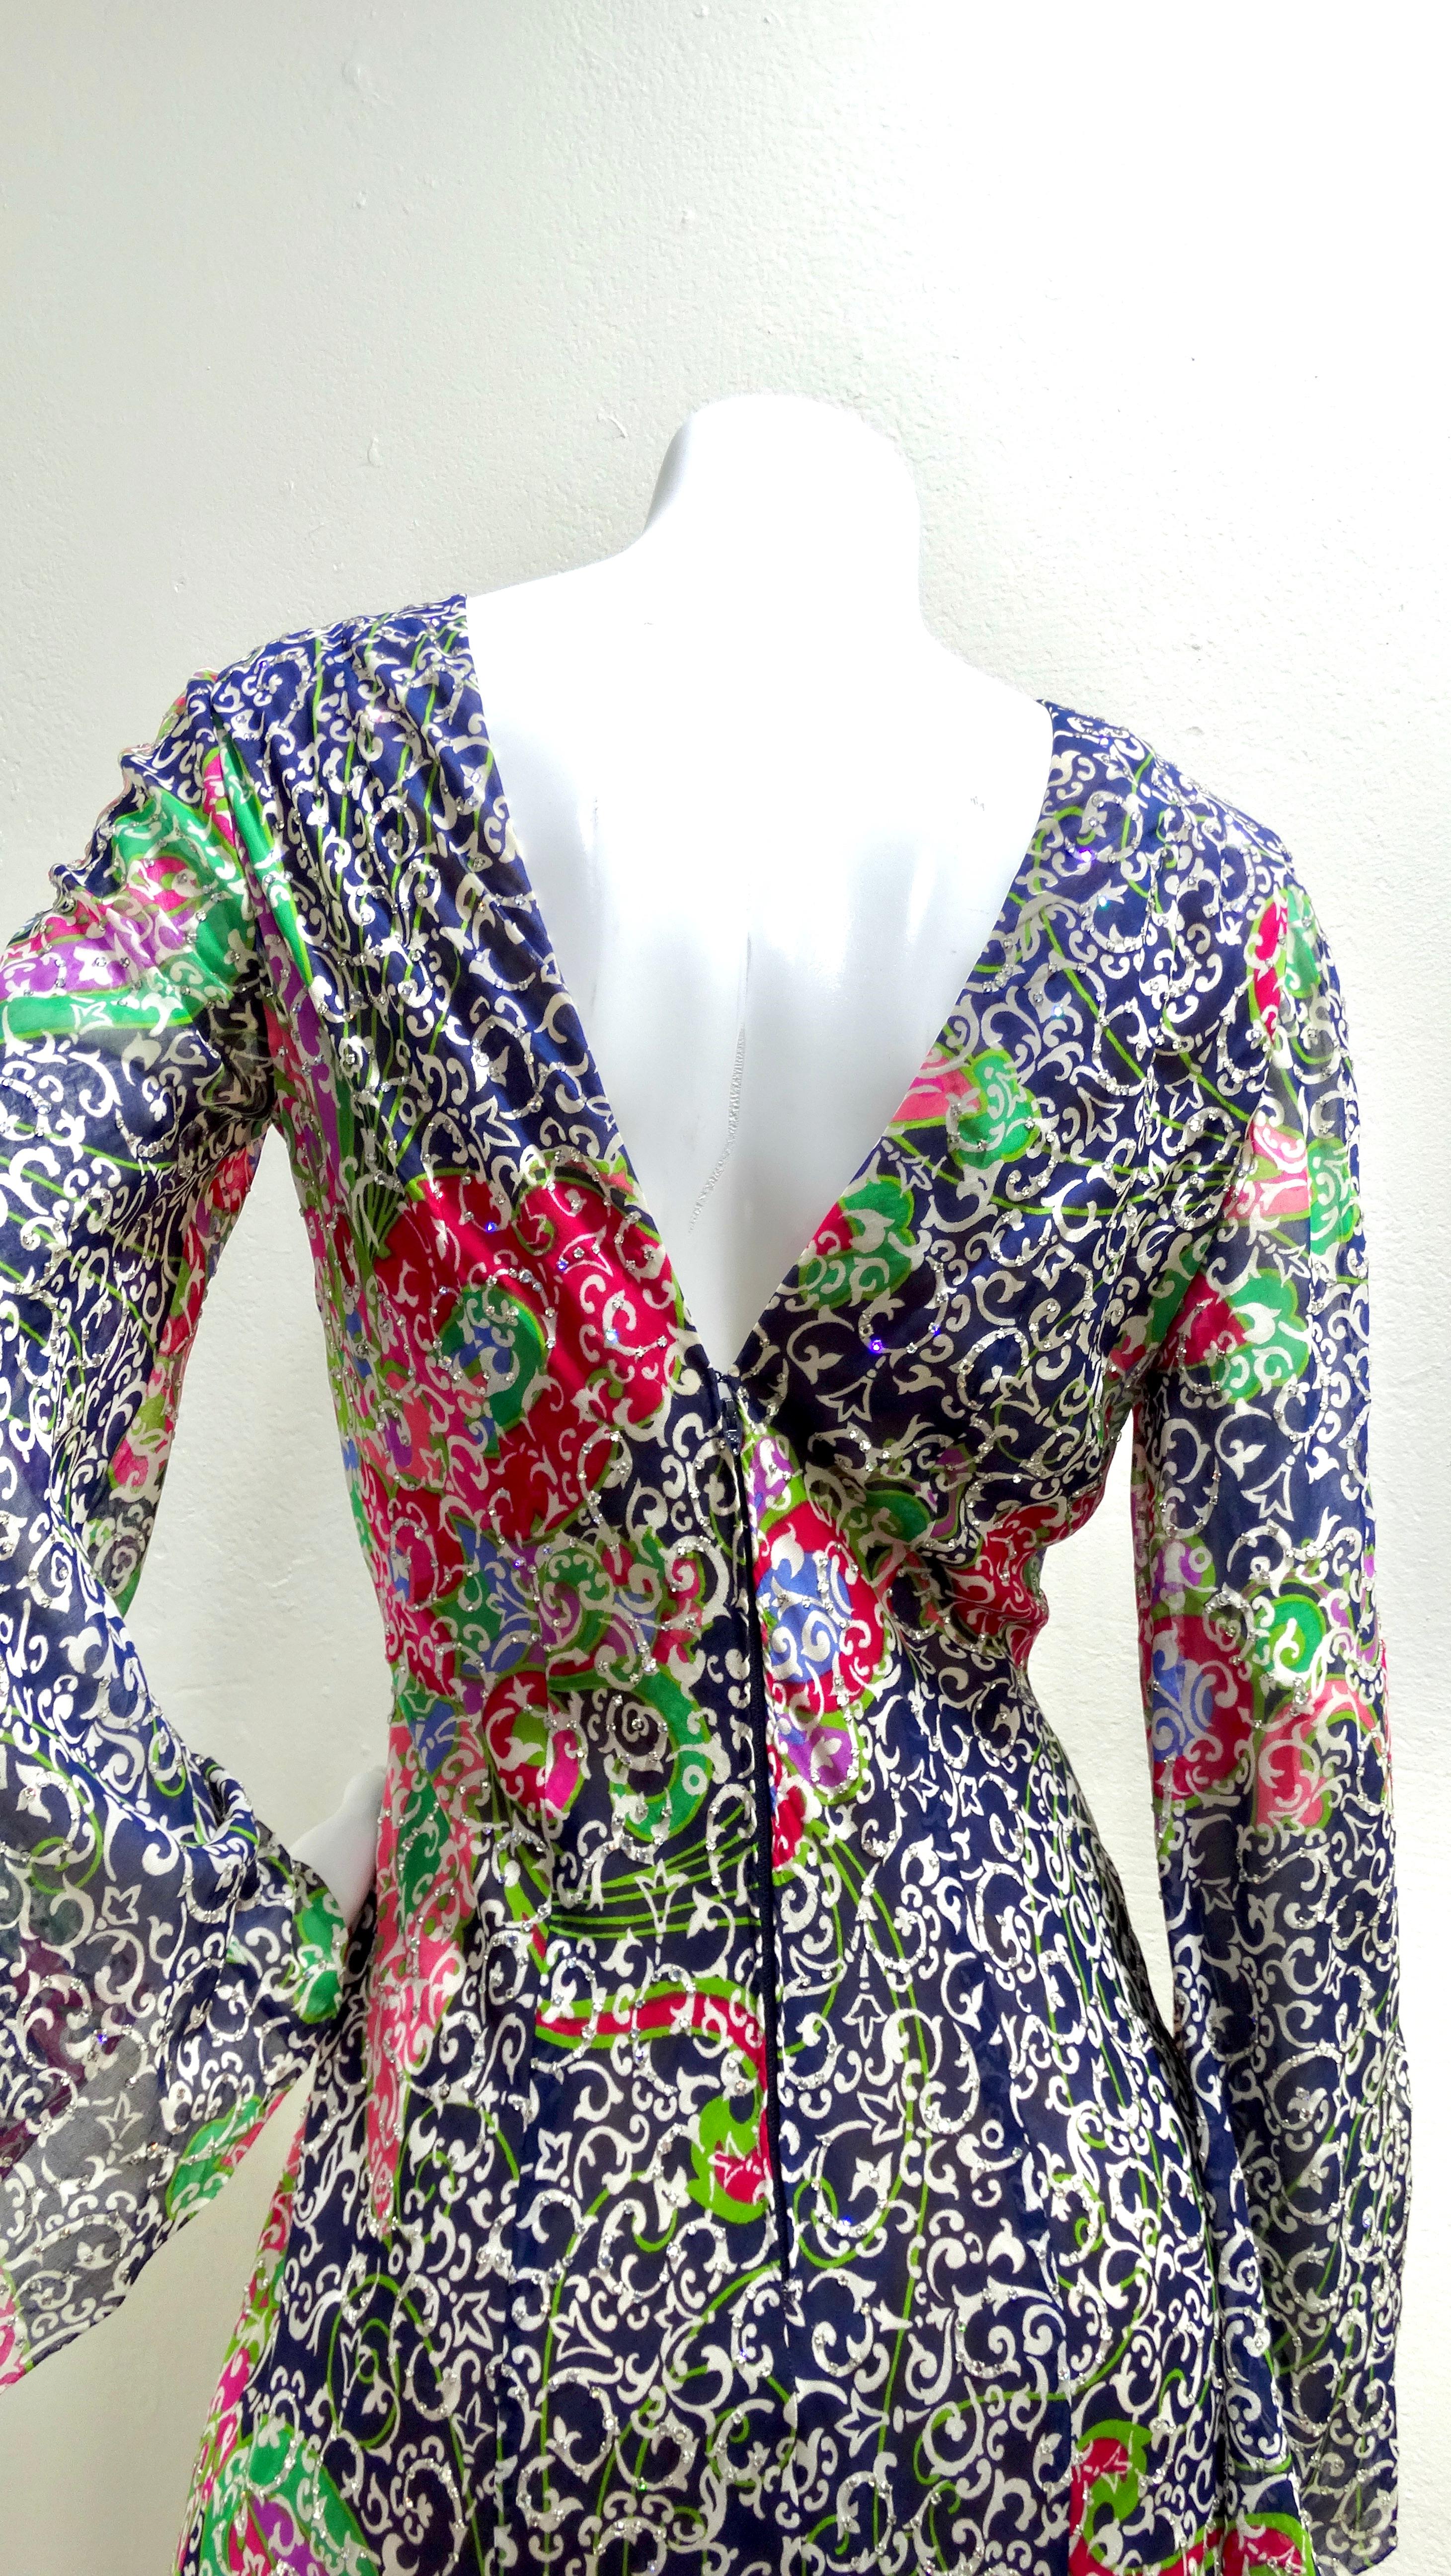 Women's Pauline Trigere Floral Silk Dress Covered in Sequins Circa 70s 